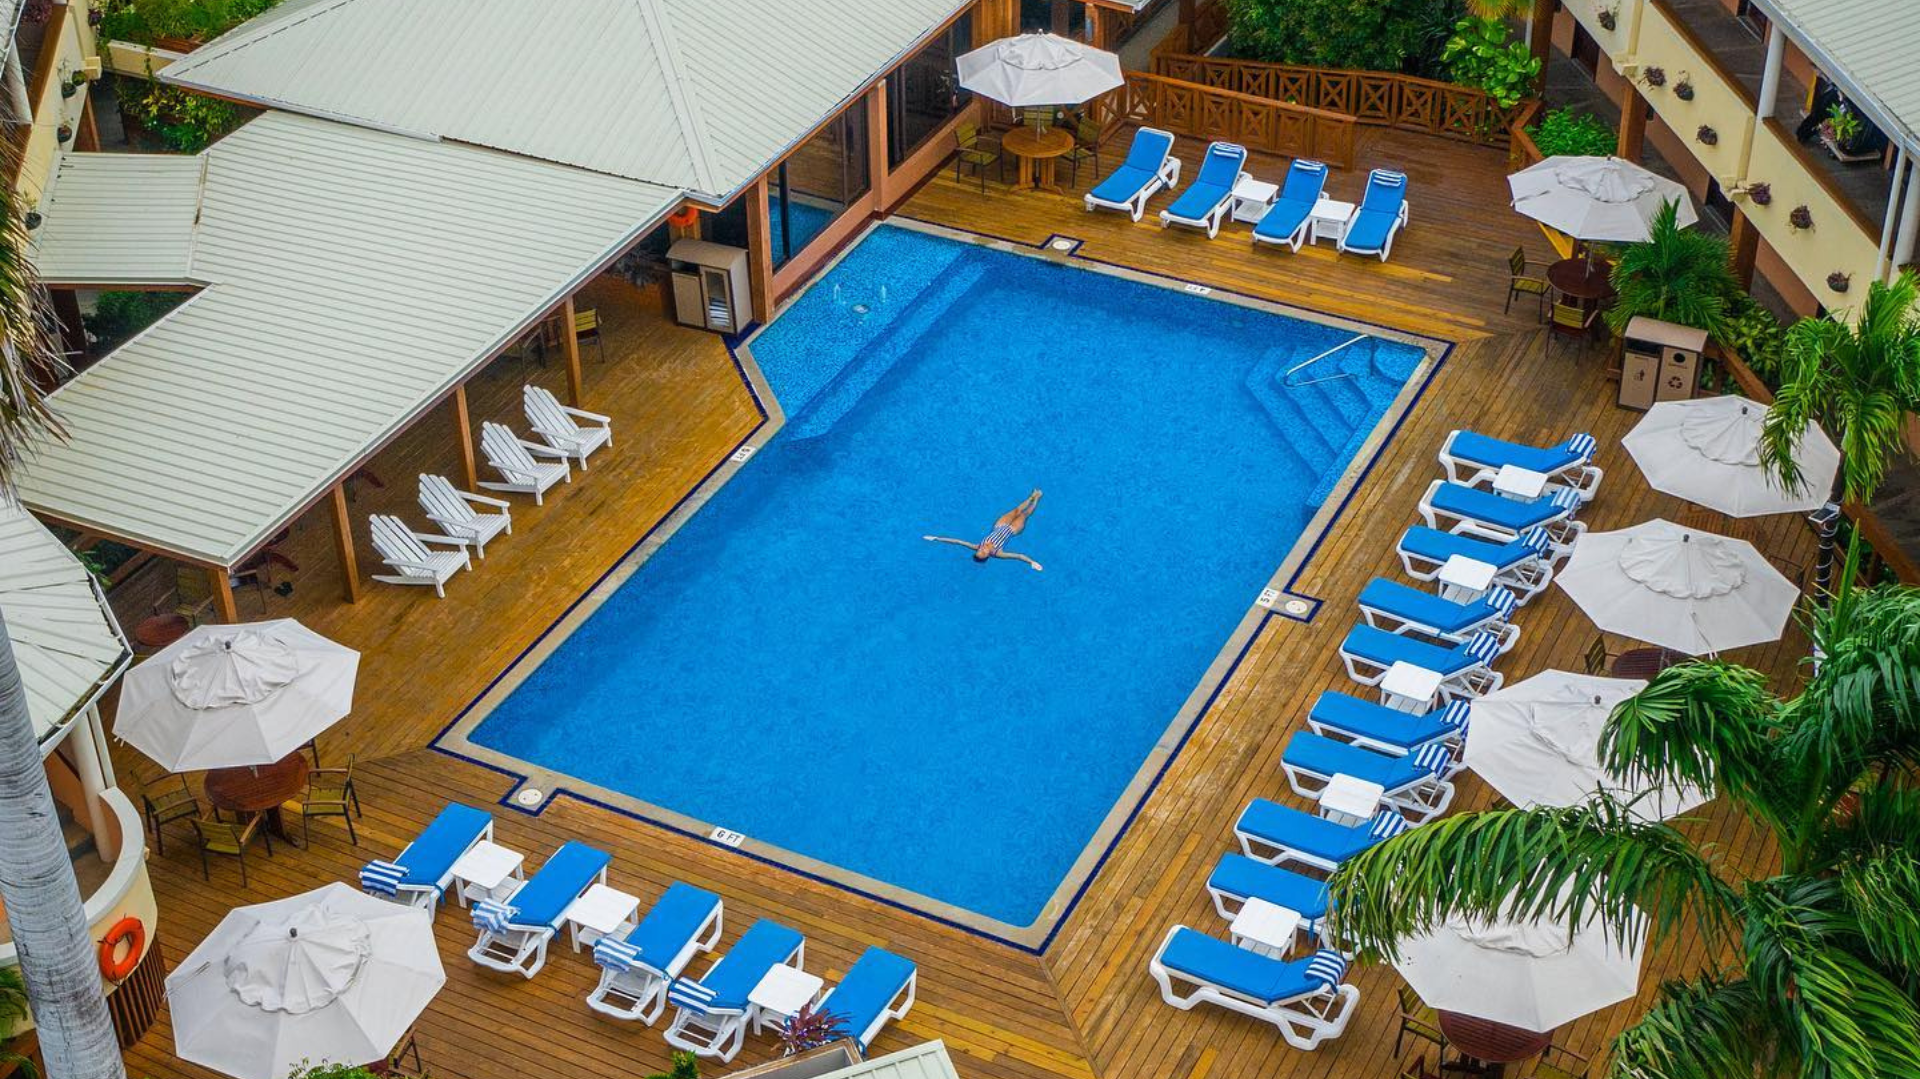 an aerial view of the hotel BW Plus Biltmore Plaza swimming pool surrounded by chairs and umbrellas .